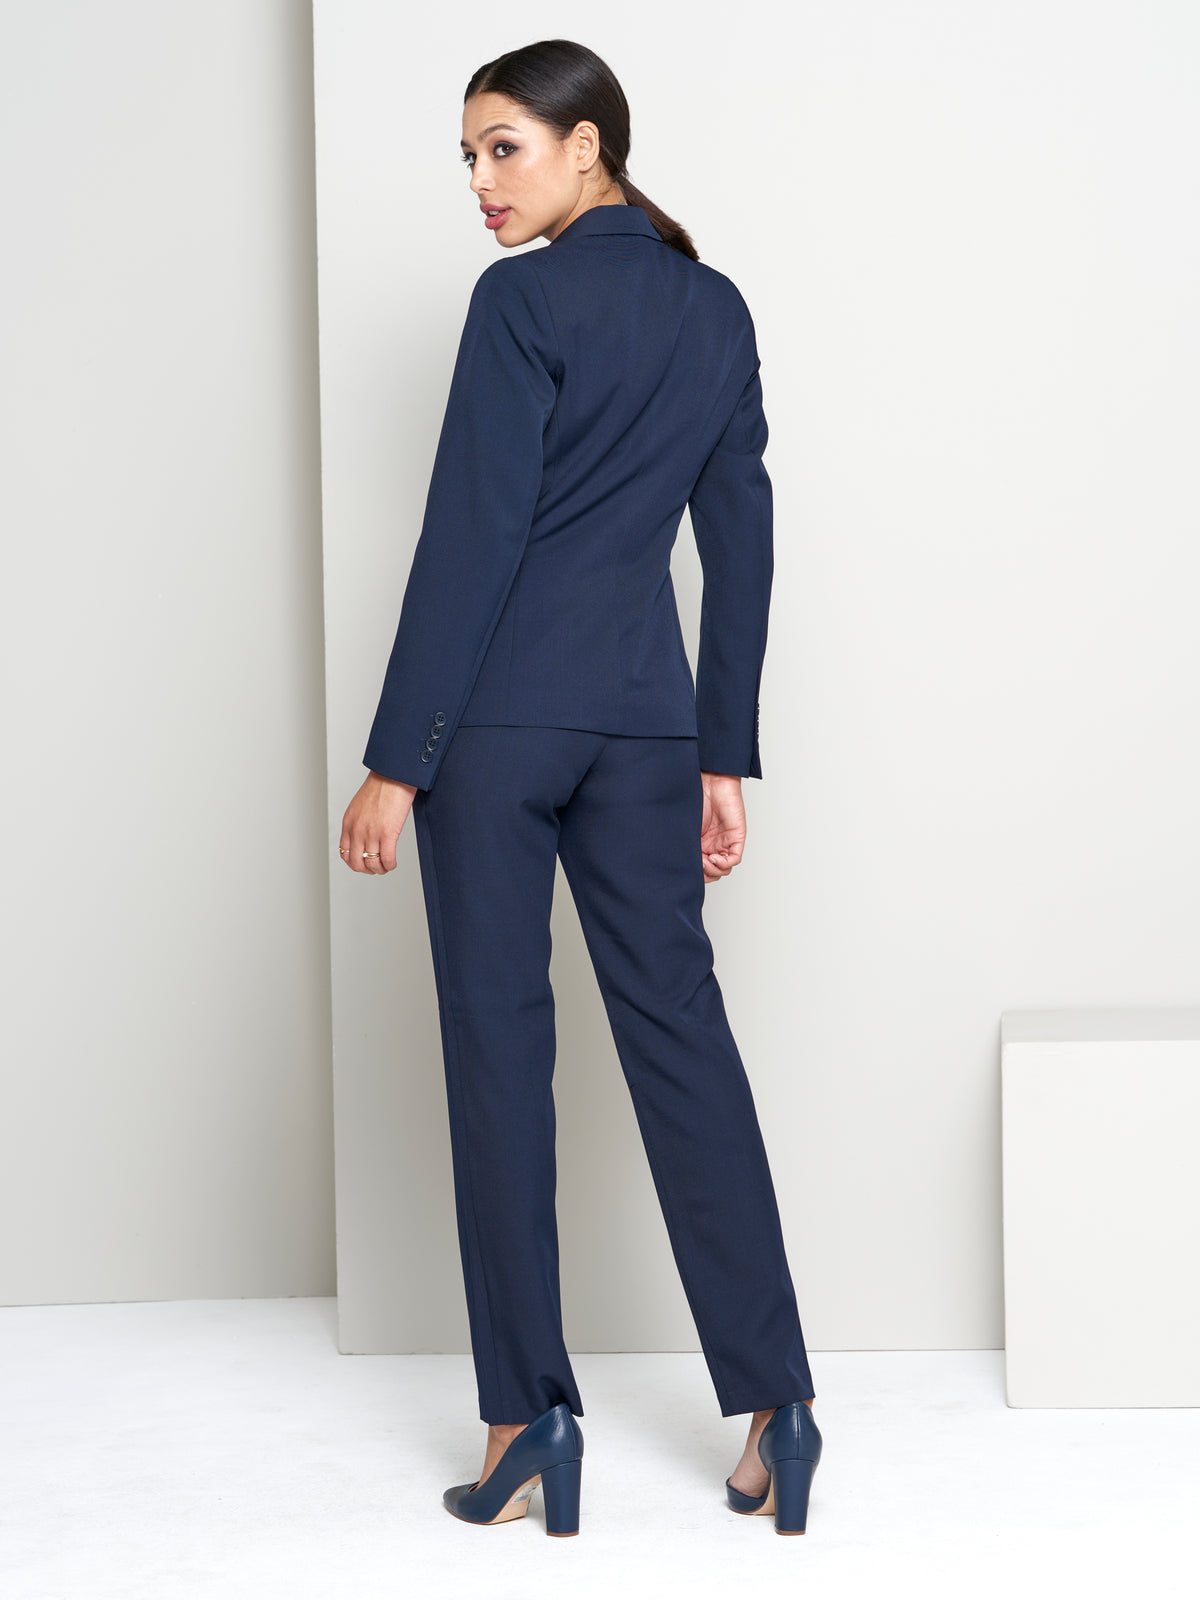 Paige fitted blazer - navy